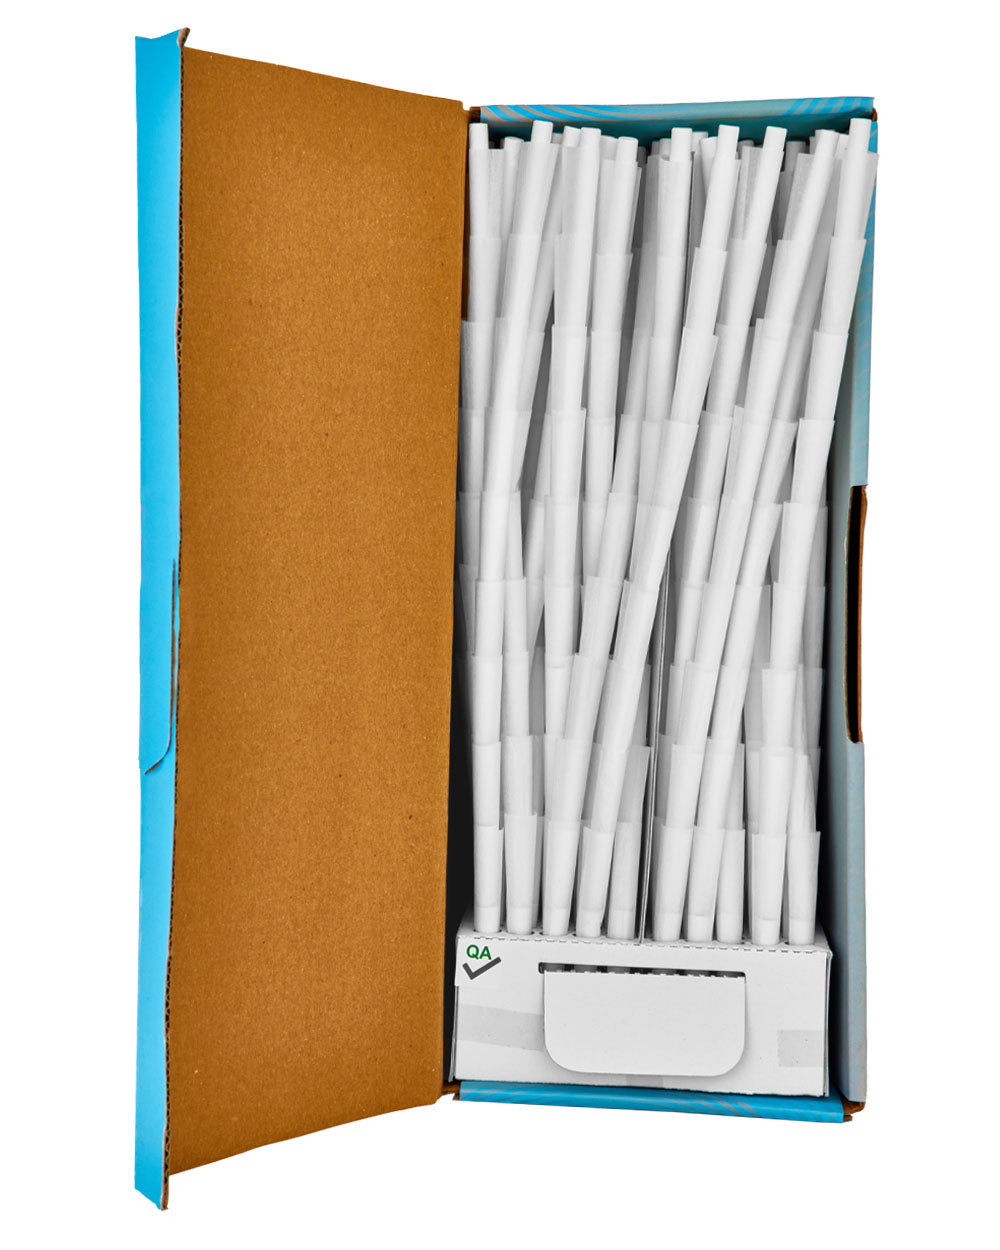 CONES + SUPPLY | 1 1/4 Size Pre-Rolled Cones | 84mm - Classic White Paper - 900 Count - 2